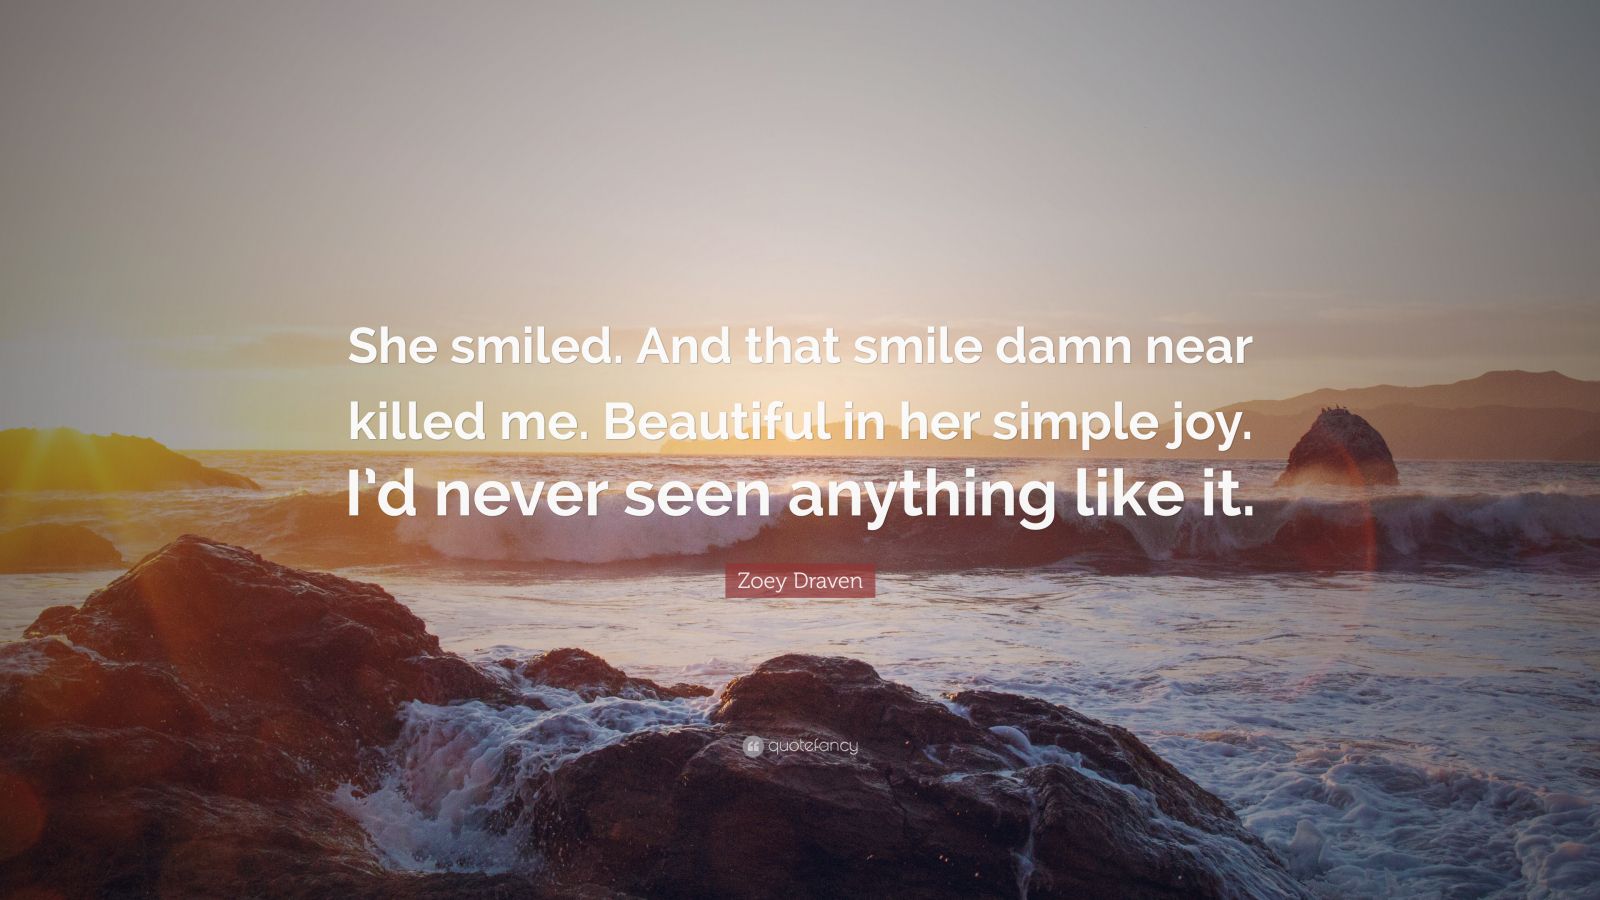 Zoey Draven Quote: “She smiled. And that smile damn near killed me.  Beautiful in her simple joy. I'd never seen anything like it.”